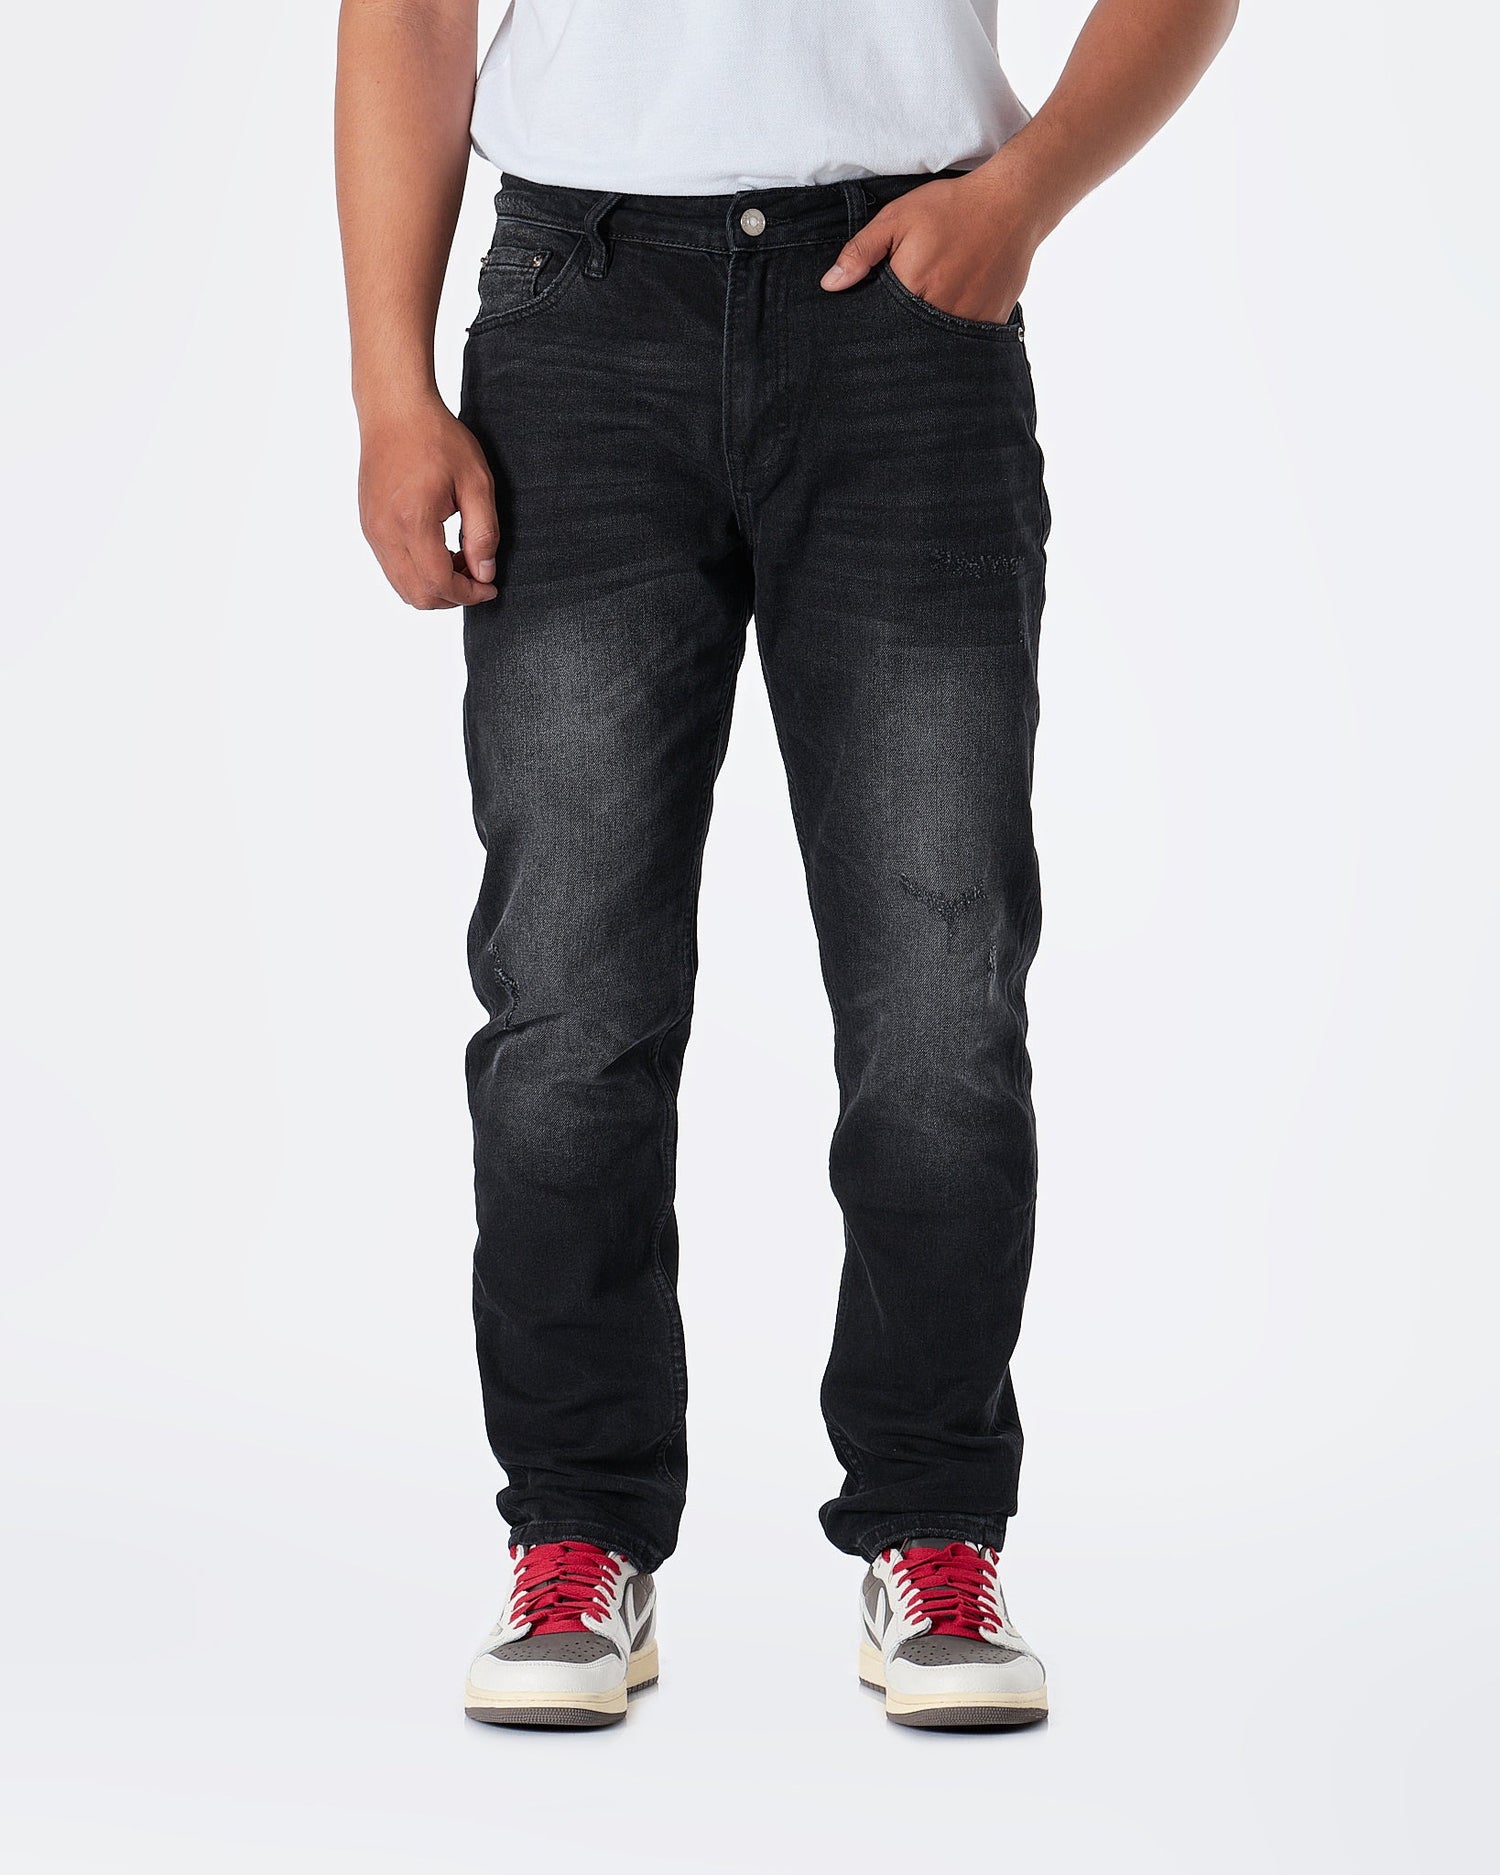 MOI OUTFIT-CD Embroidered Men Jeans 69.90